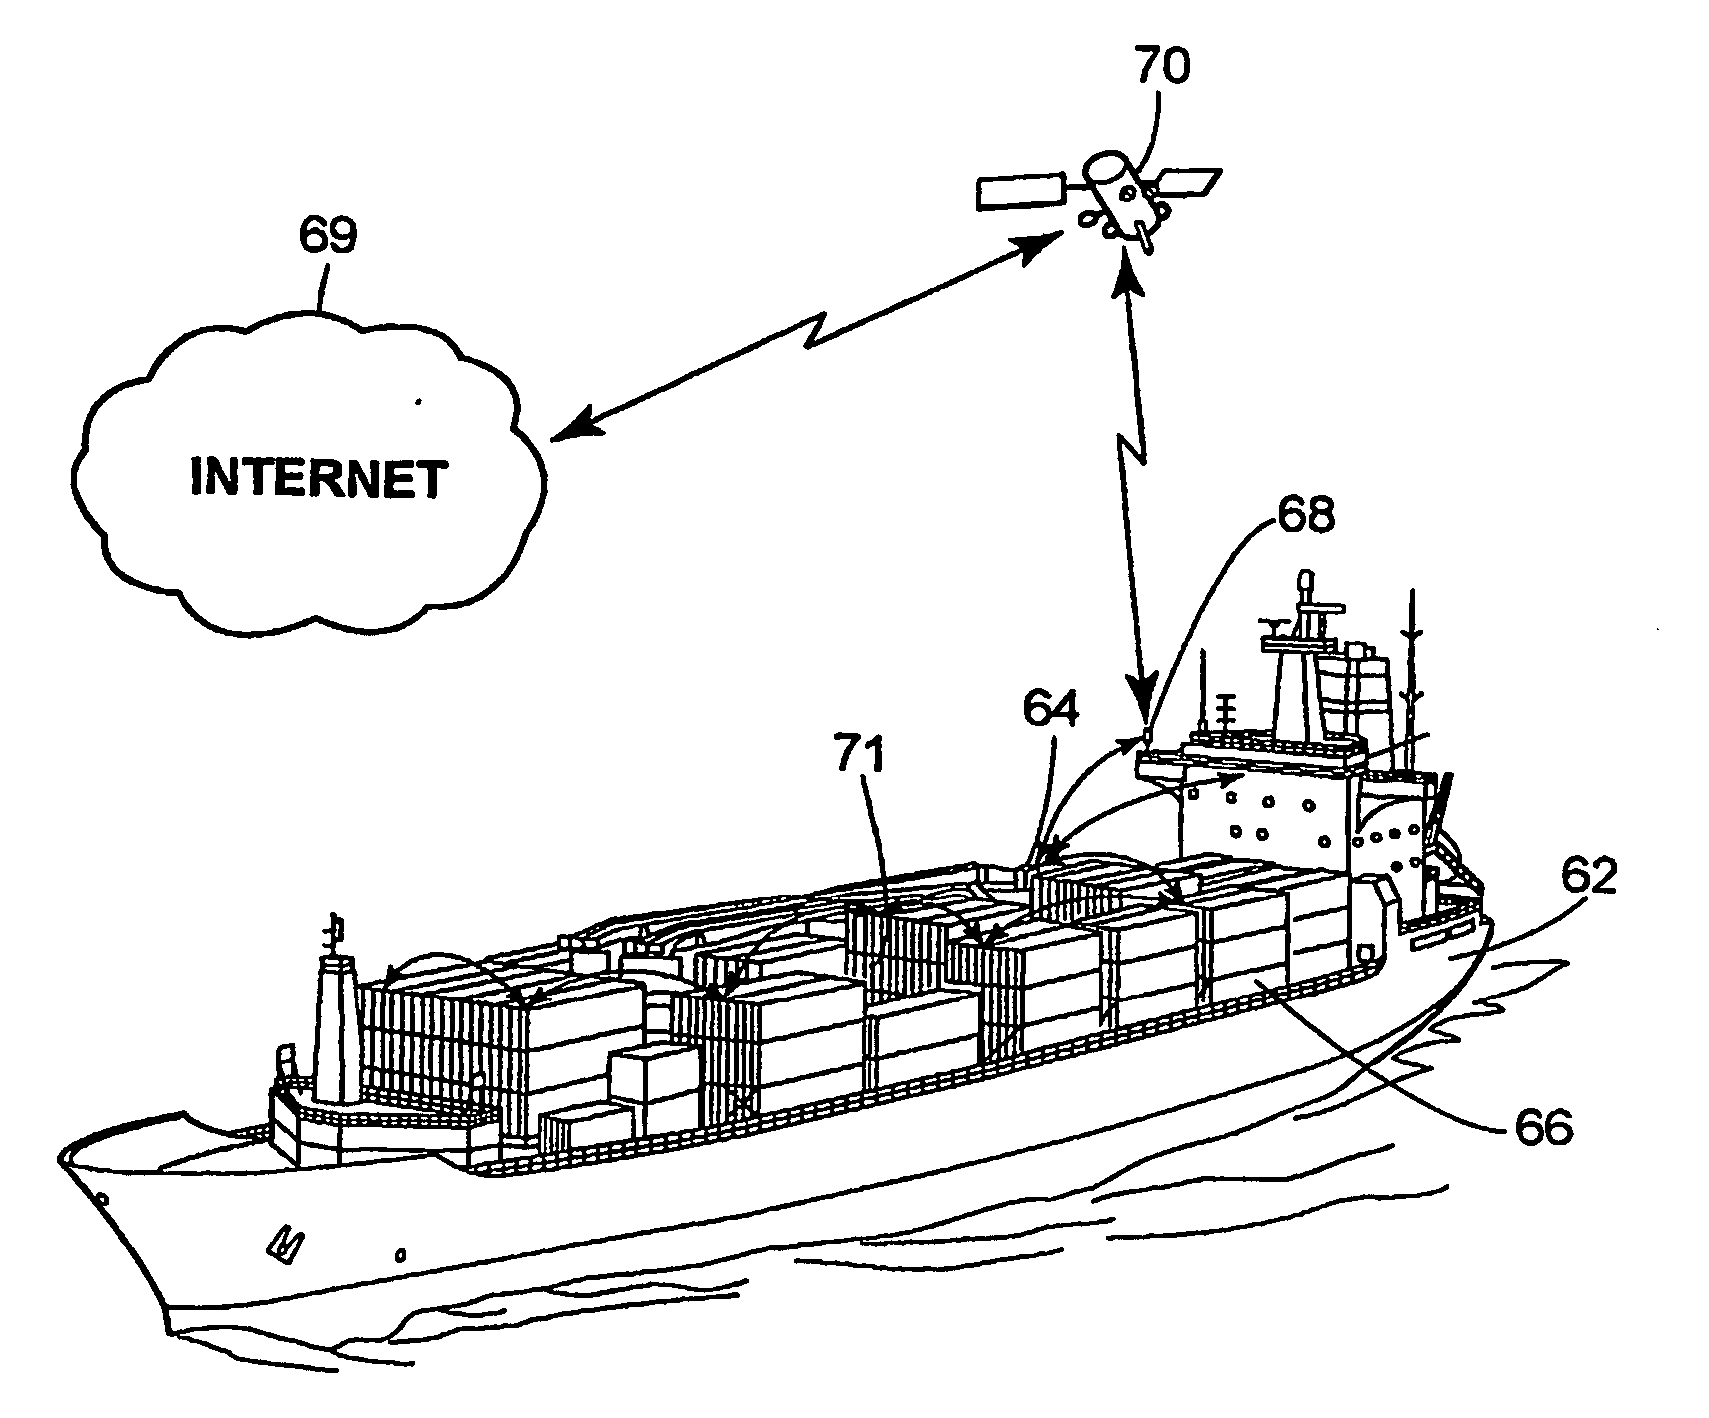 Shipping container and method of using same